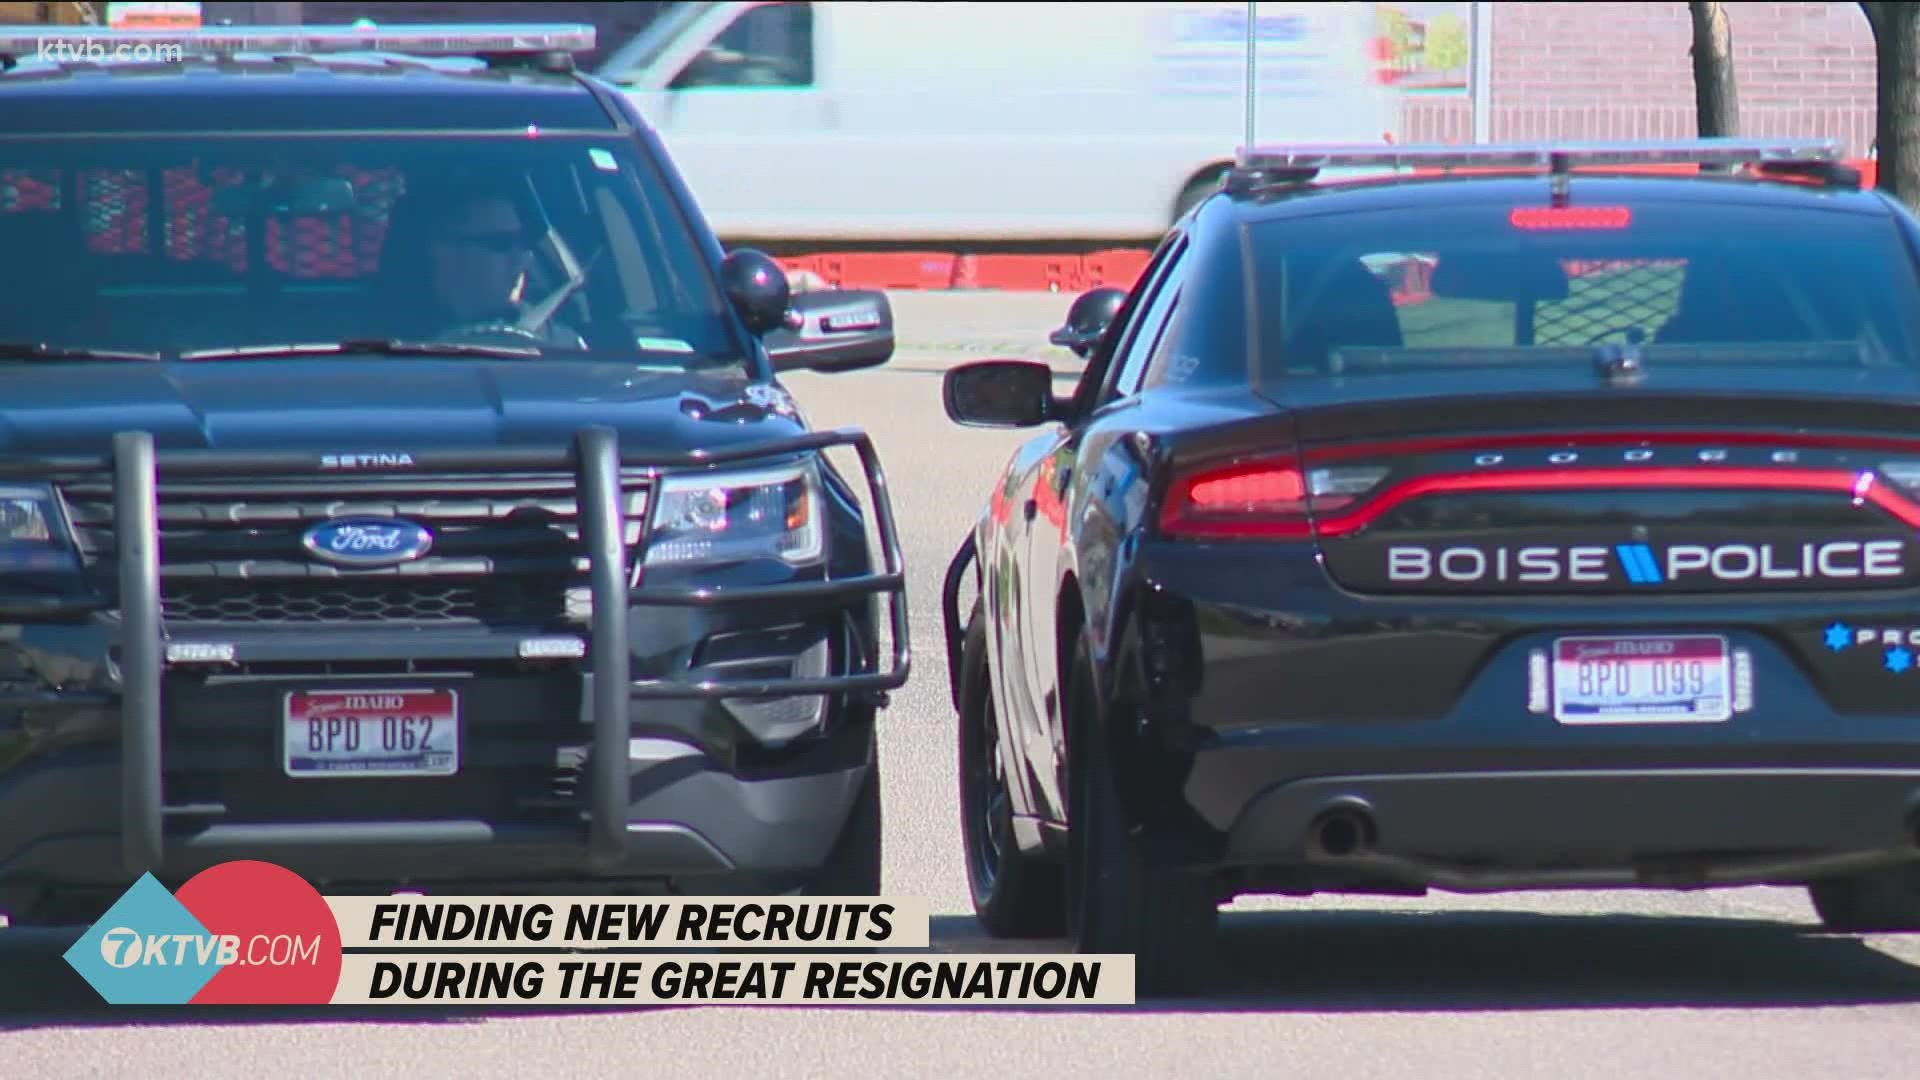 Boise Police Department looking for new officers during the 'great resignation'